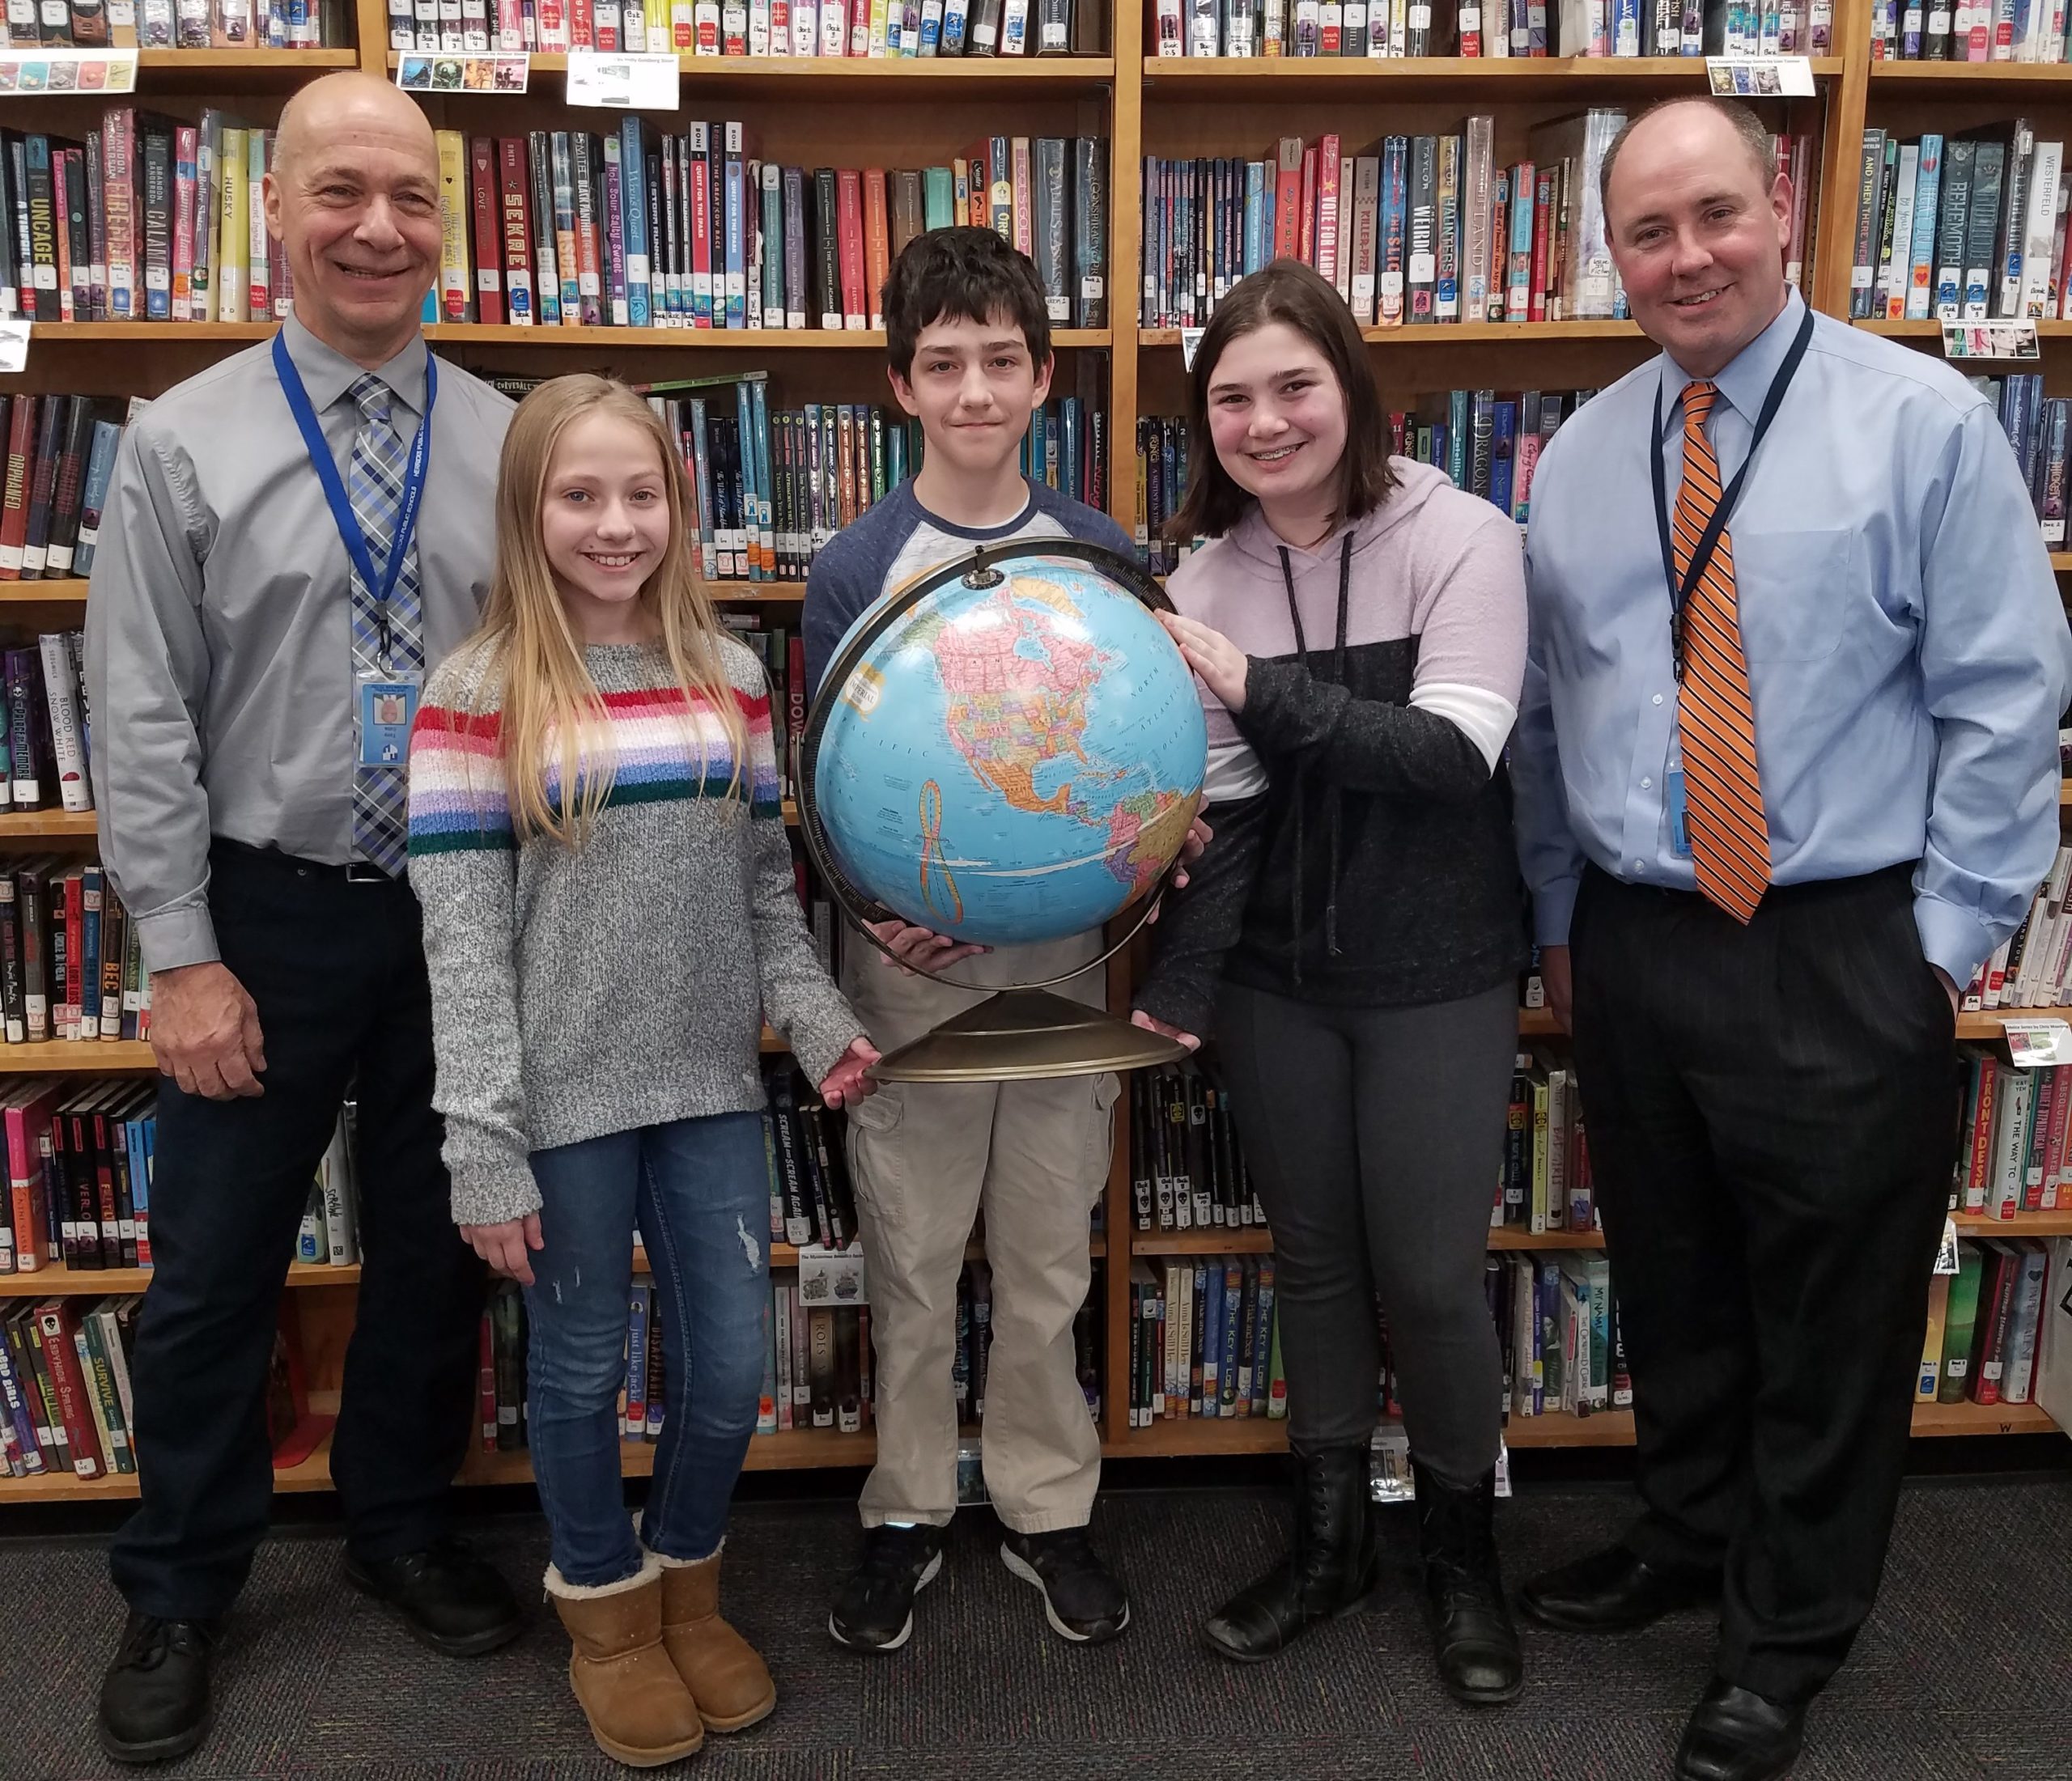 Michael Zanetti, center, is pictured with runners-up Sasha Stern and Isabella Pavolvici, along with Herricks Middle School Principal Brian McConaghy and Social Studies Chairperson Tony Cillis. (Photo courtesy of Herricks Public Schools)